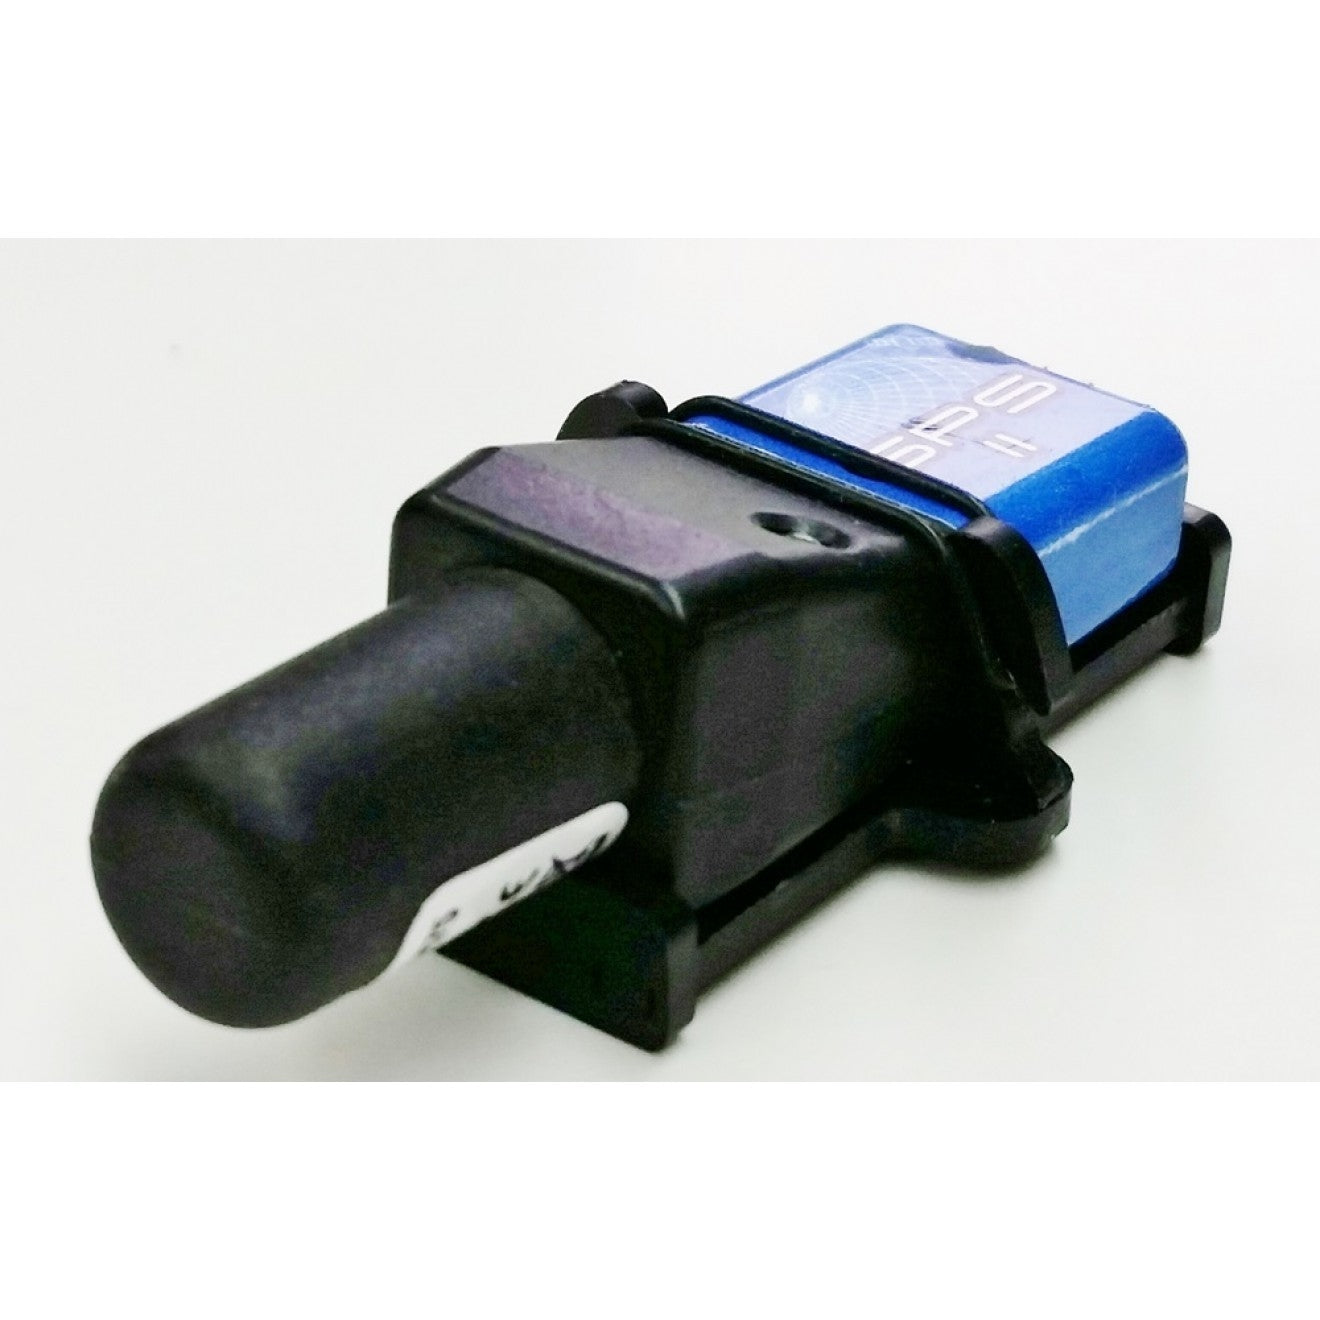 PowerBox Systems GPS 2 Click Holder from STV-Tech 021-02